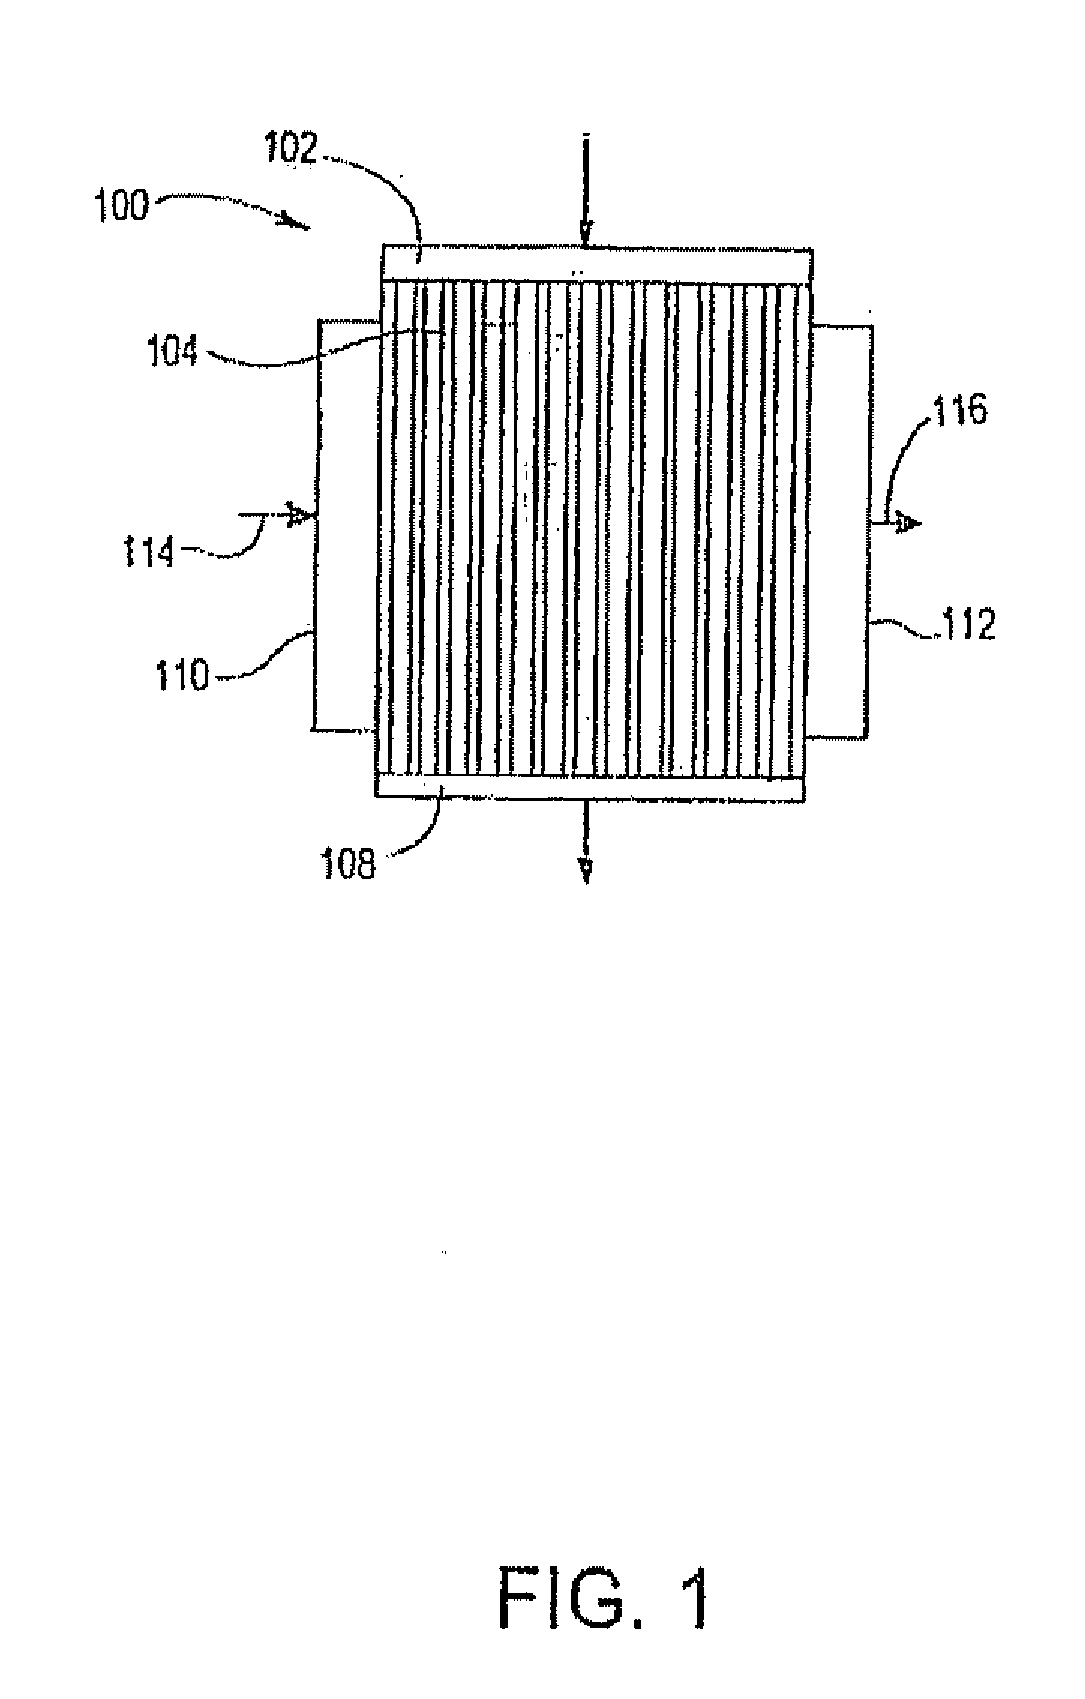 Method Of Installing An Epoxidation Catalyst In A Reactor, A Method Of Preparing An Epoxidation Catalyst, An Epoxidation Catalyst, A Process For The Preparation Of An Olefin Oxide Or A Chemical Derivable From An Olefin Oxide, And A Reactor Suitable For Such A Process